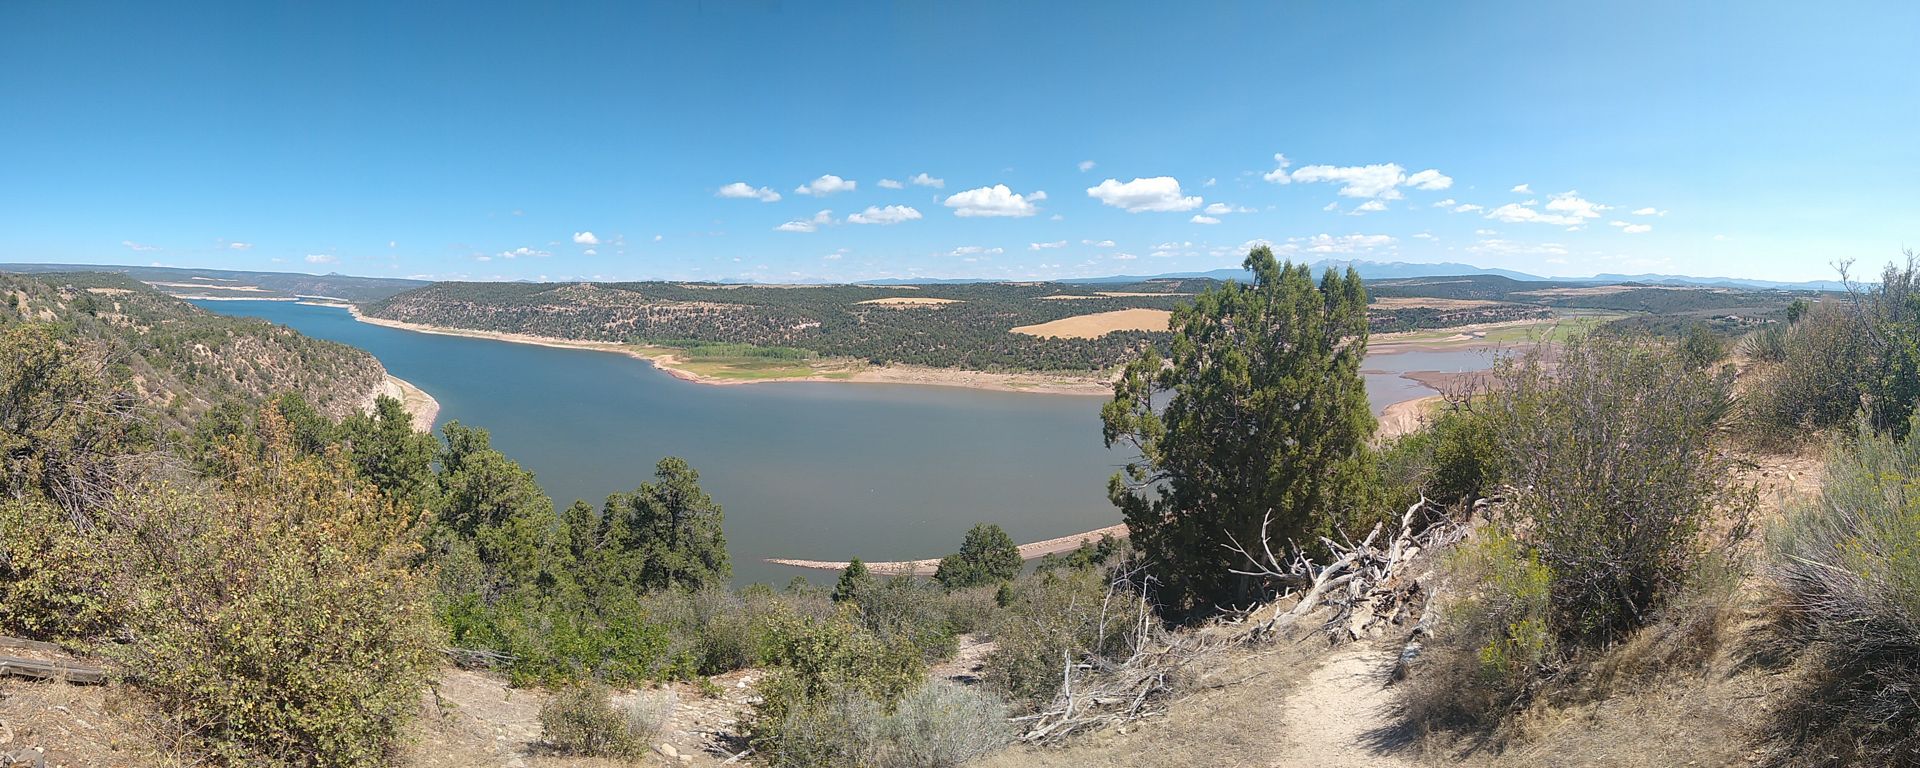 McPhee Reservoir (Delores behind distant cliffs to the right)